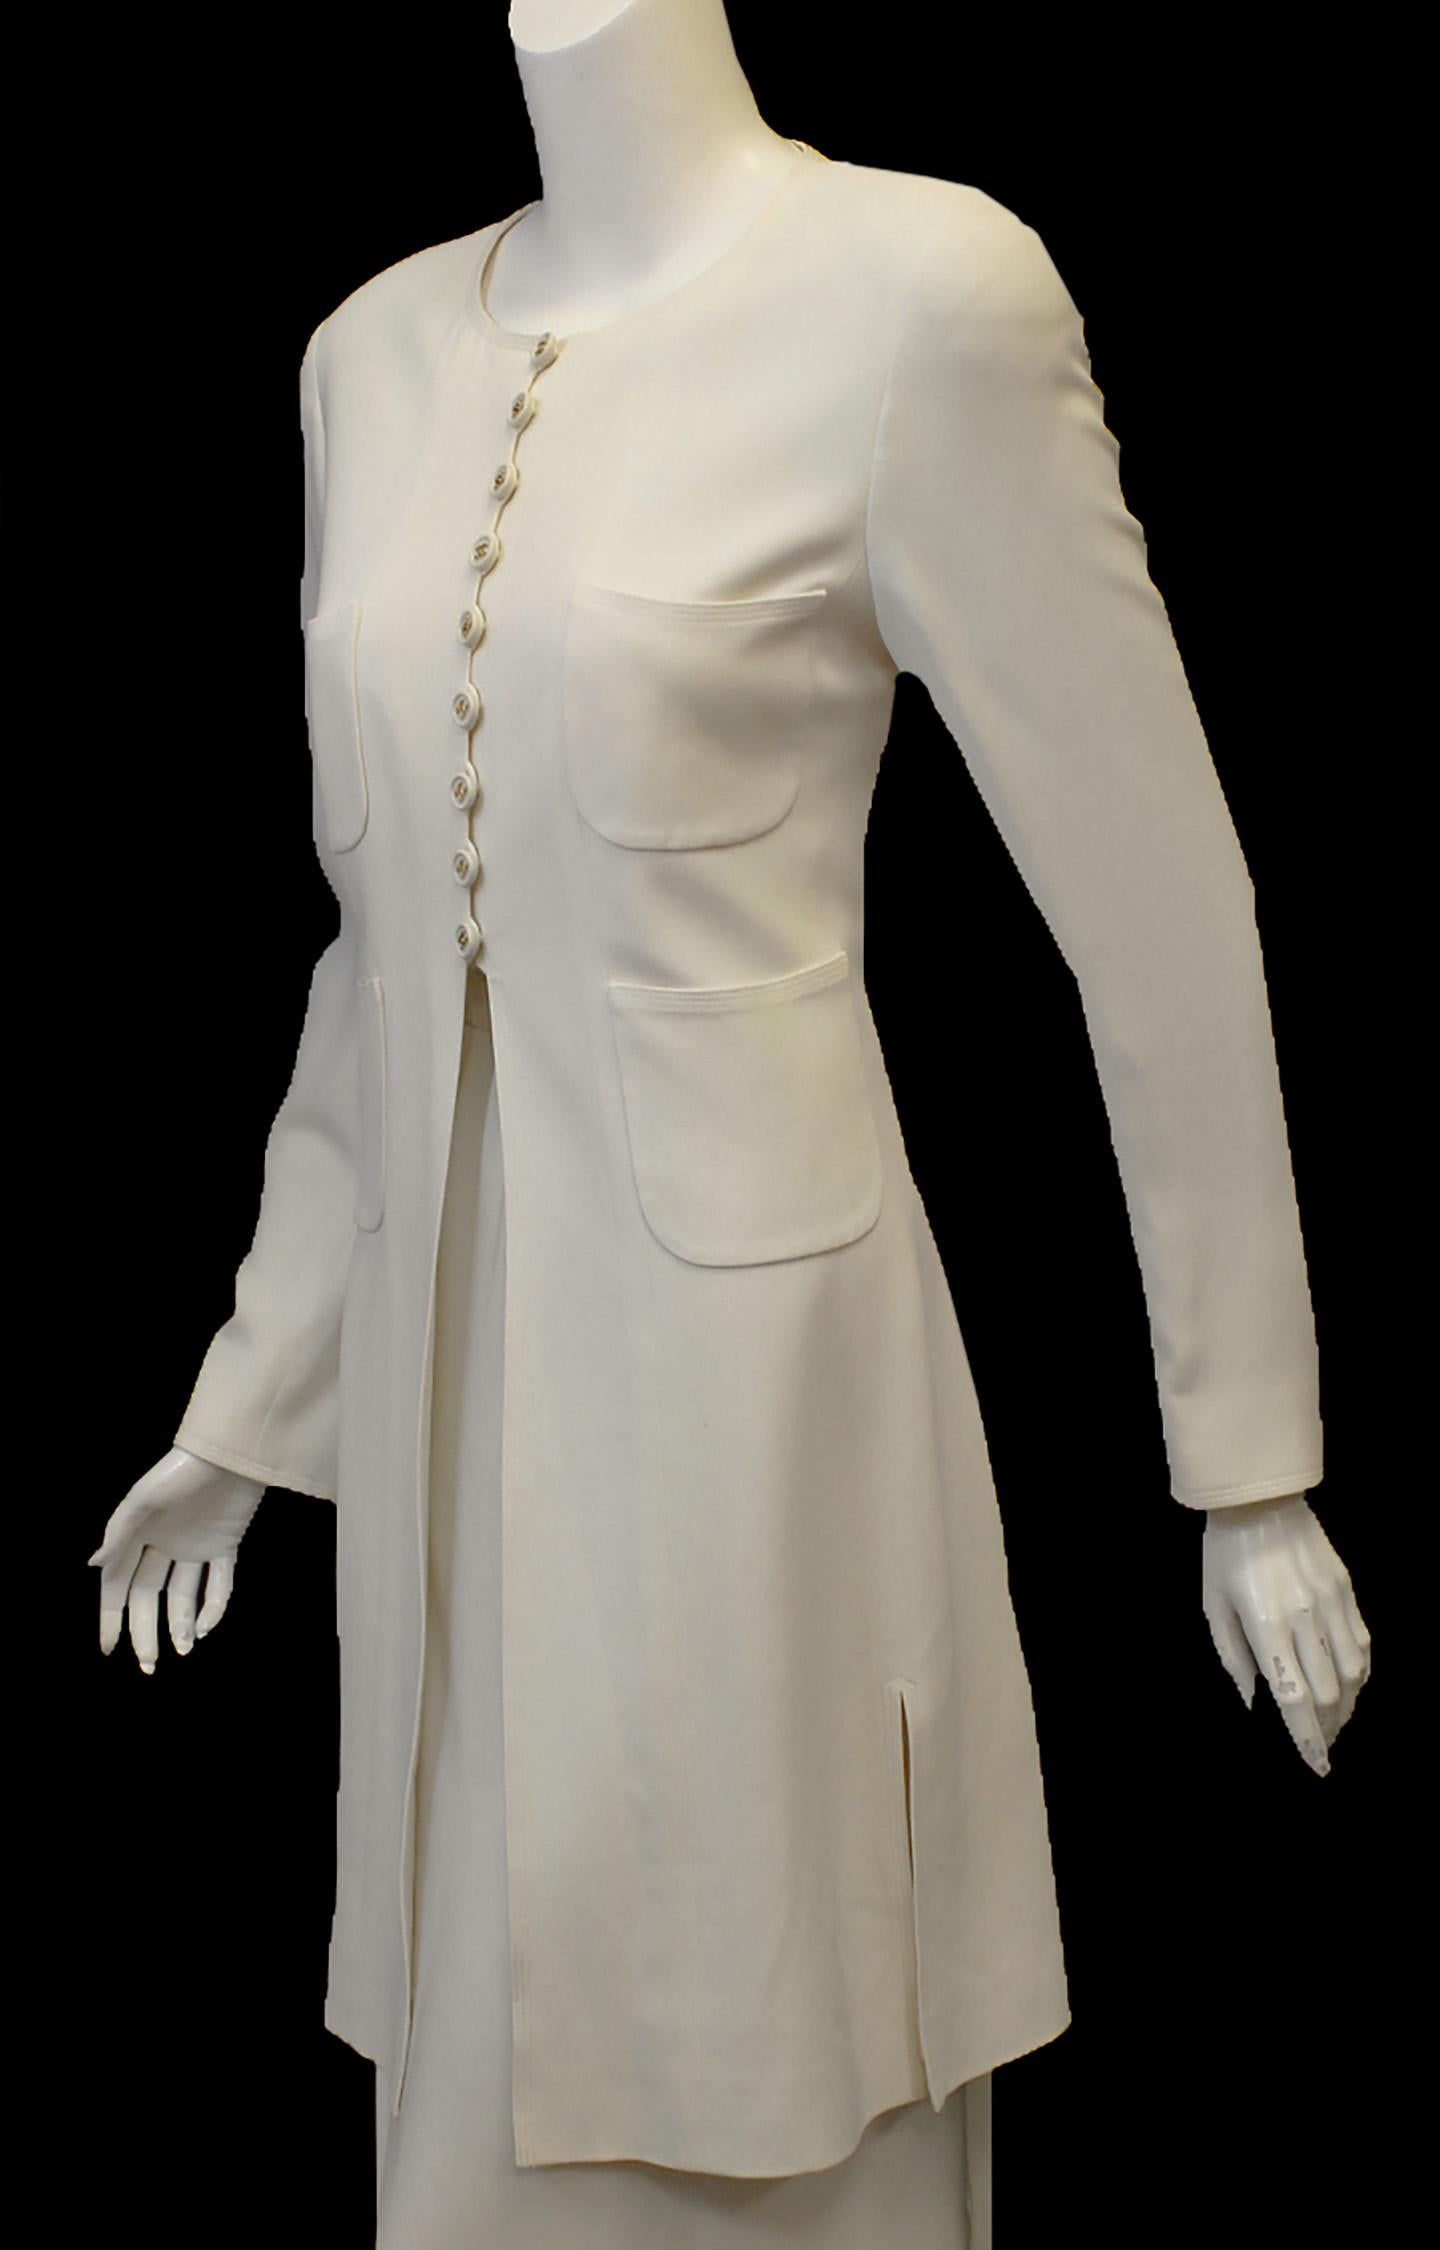 Chanel winter white wool blend long tuxedo style jacket with round neckline includes 9 winter white buttons with gold tone CC's on buttons and loops for closure.  The buttons come down to the waist and is opened to the hem just above the knee.   The